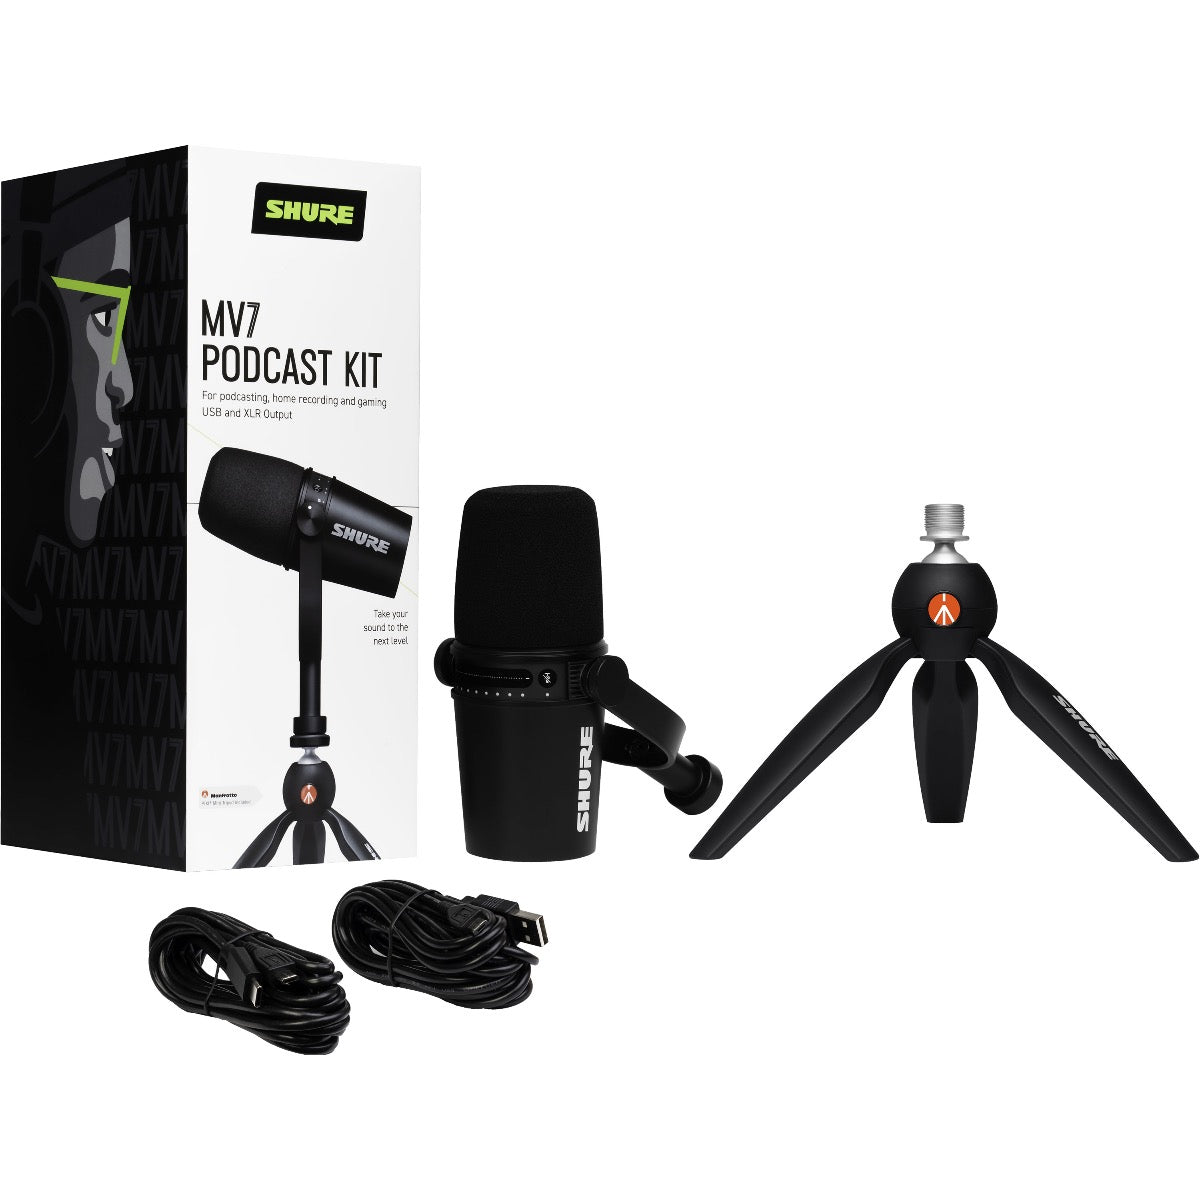 Shure MV7 Podcast Microphone Kit with Manfrotto Desktop Tripod